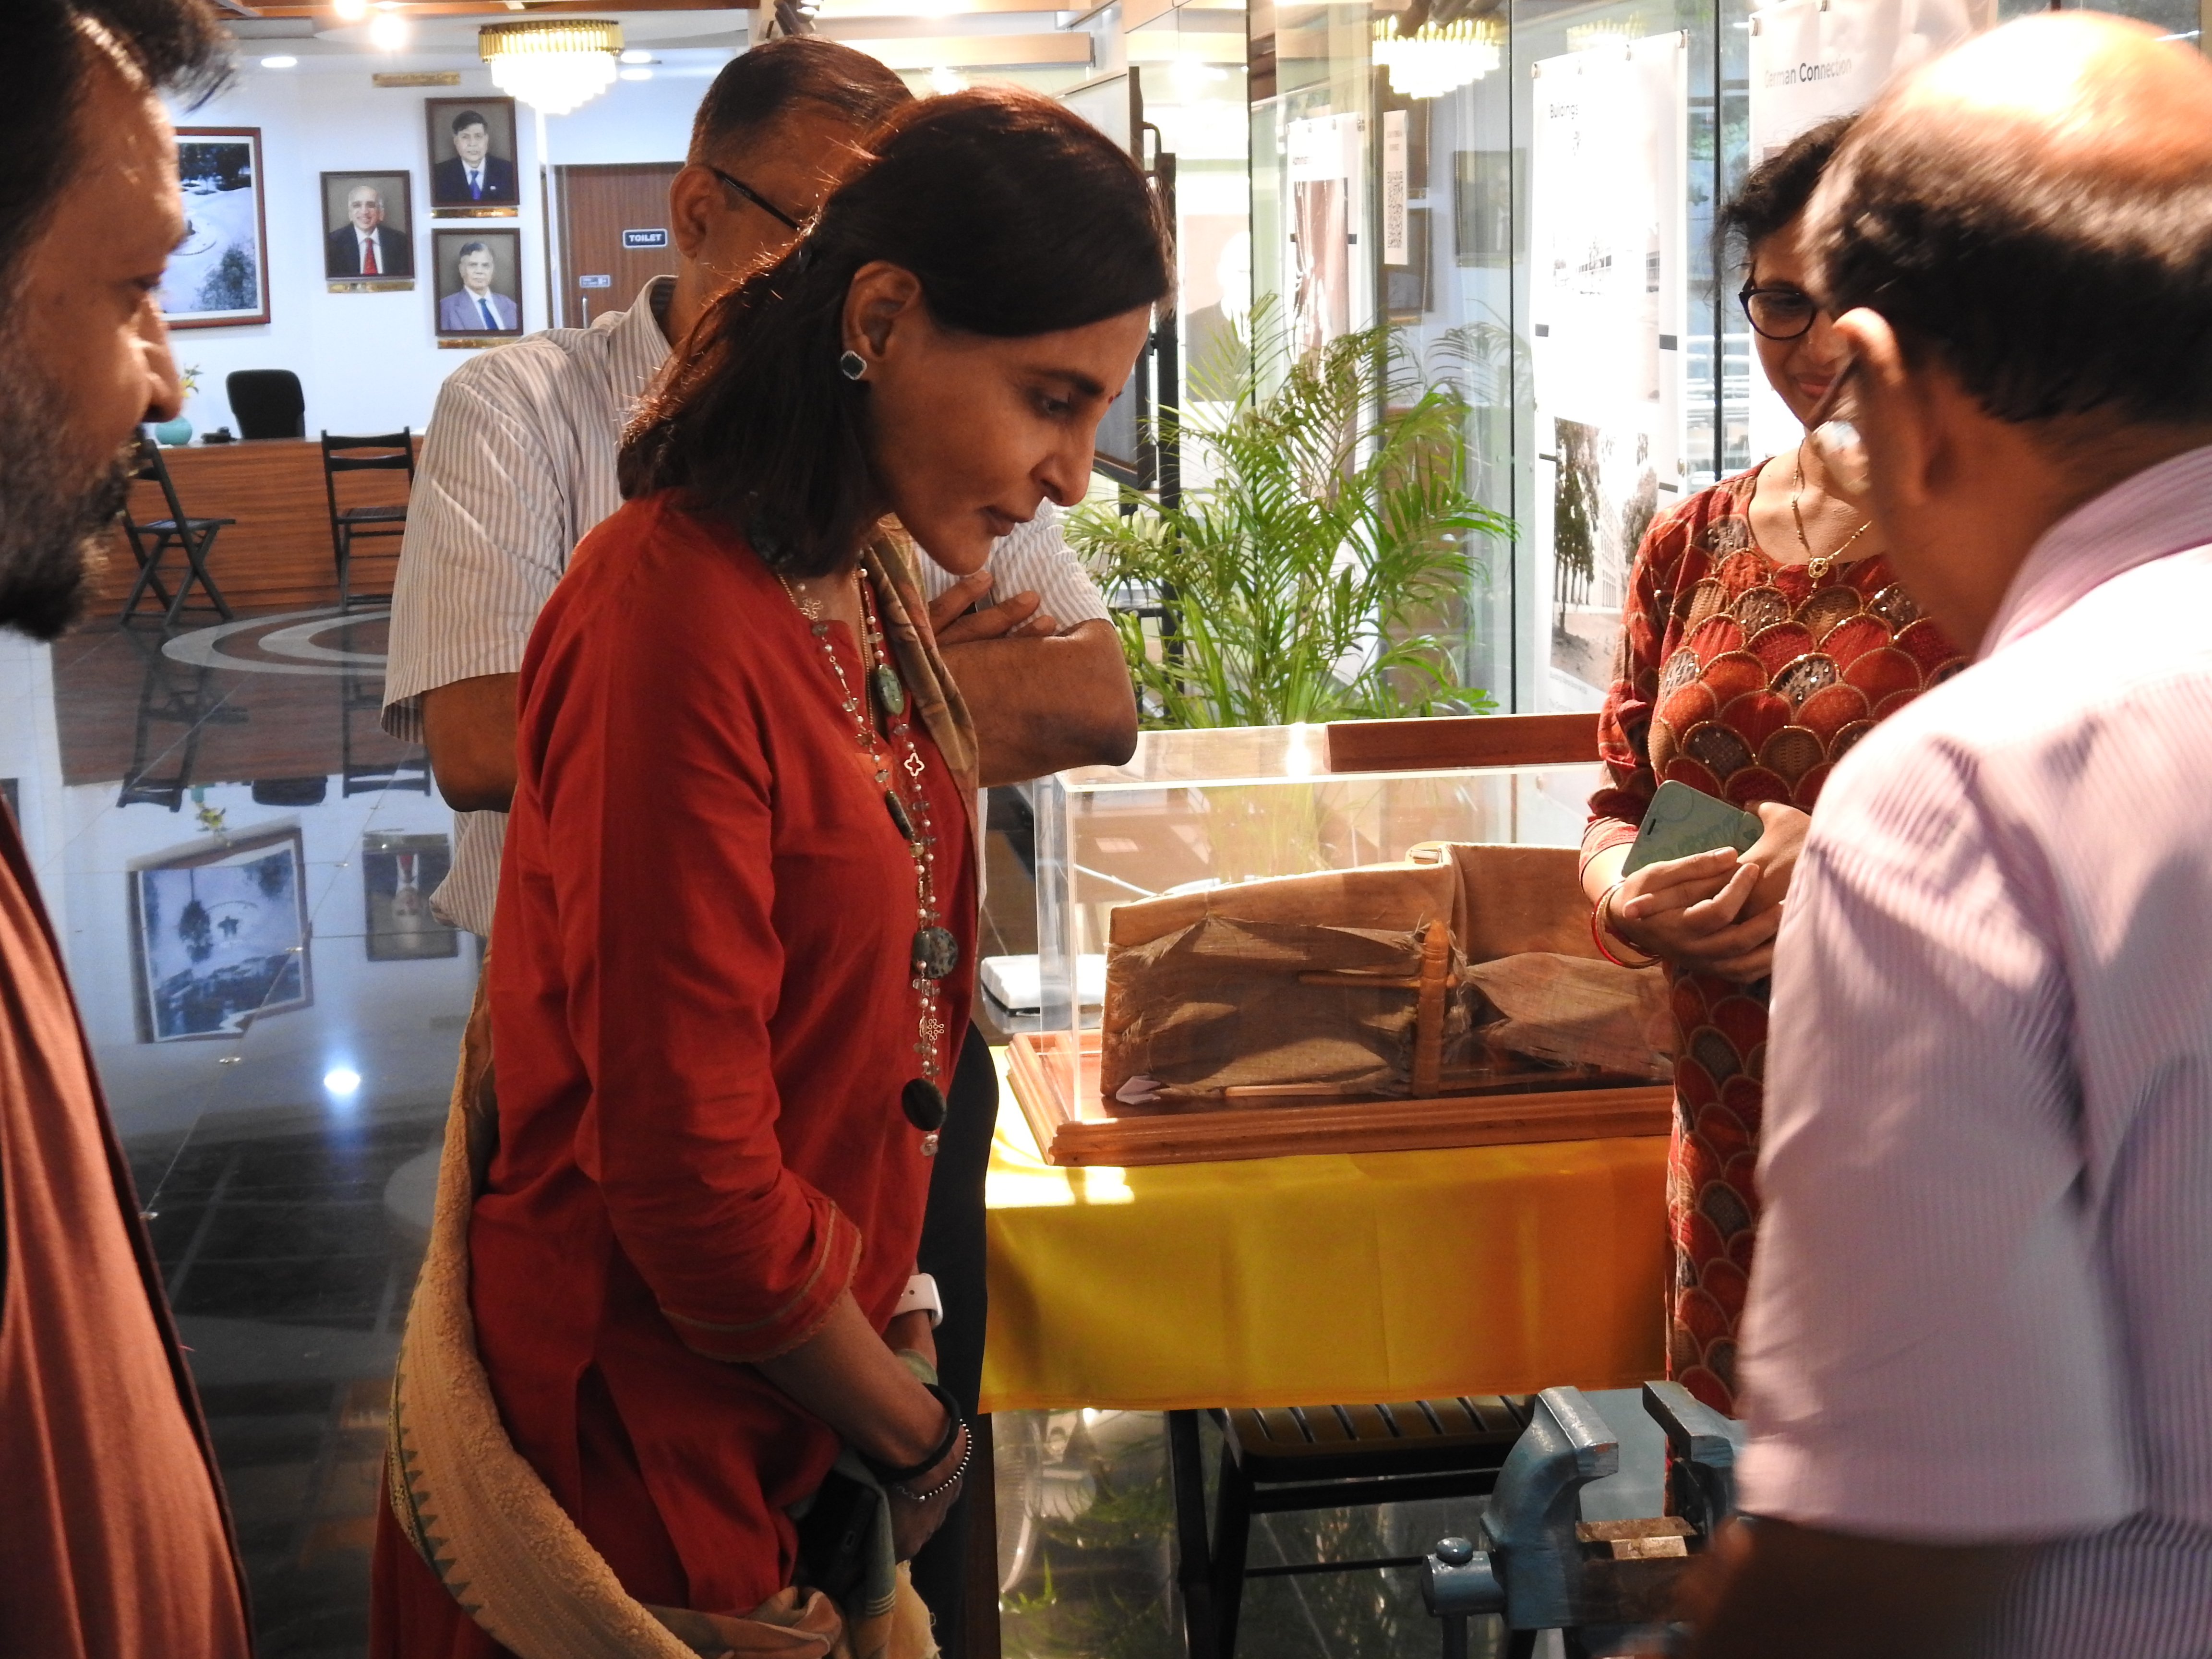 Suneeta Reddy takes a look at an artefact at the Heritage Centre